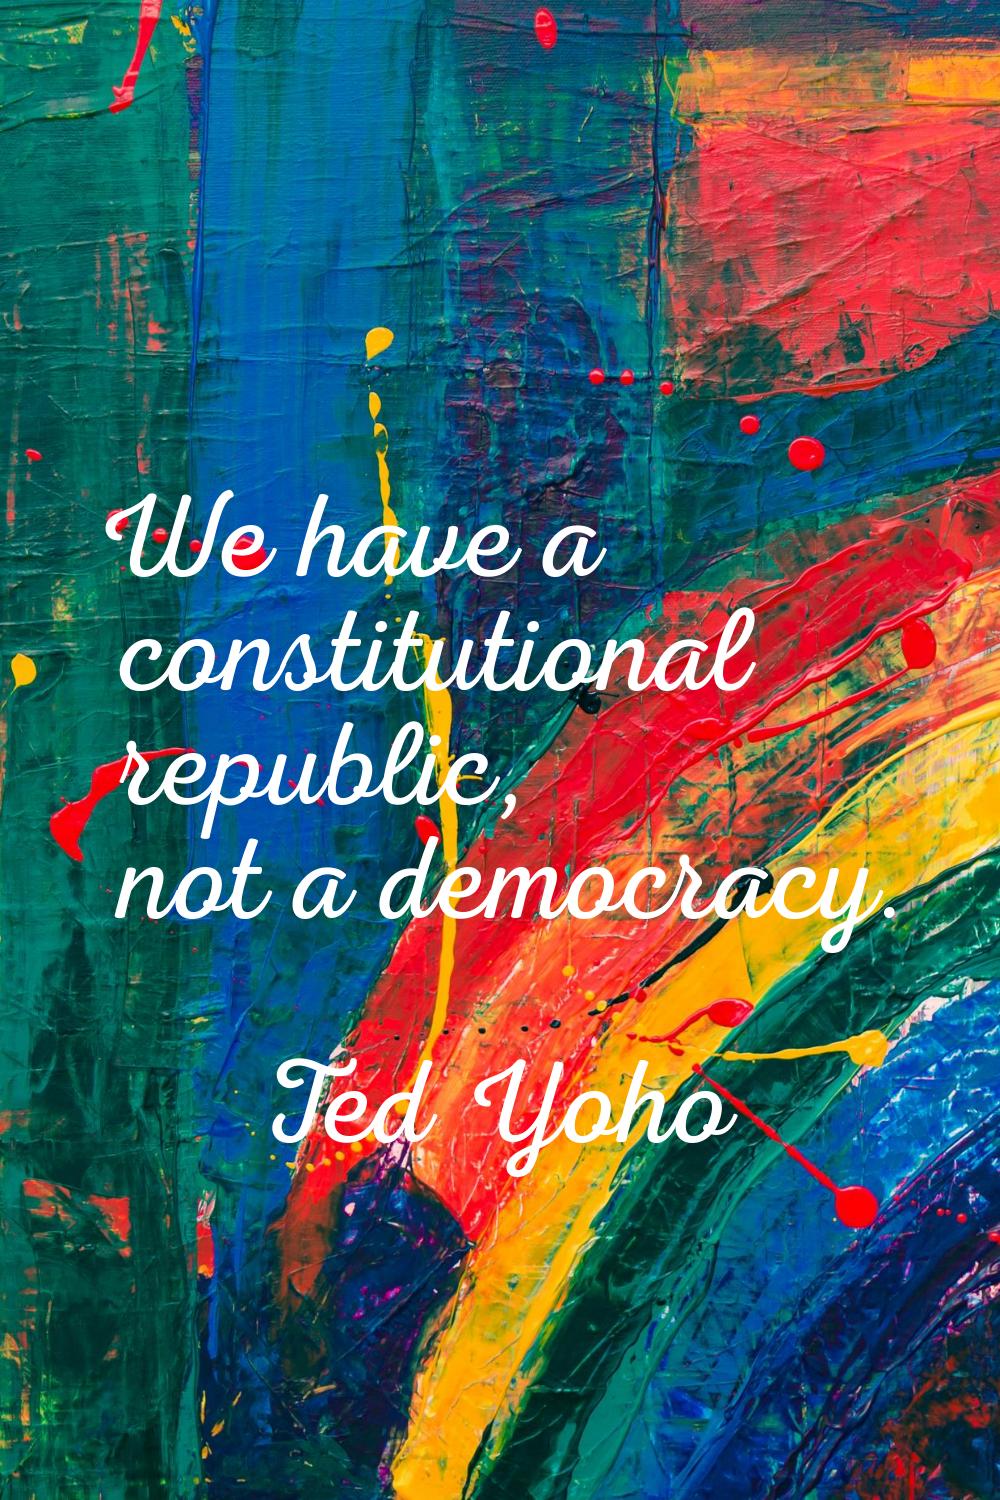 We have a constitutional republic, not a democracy.